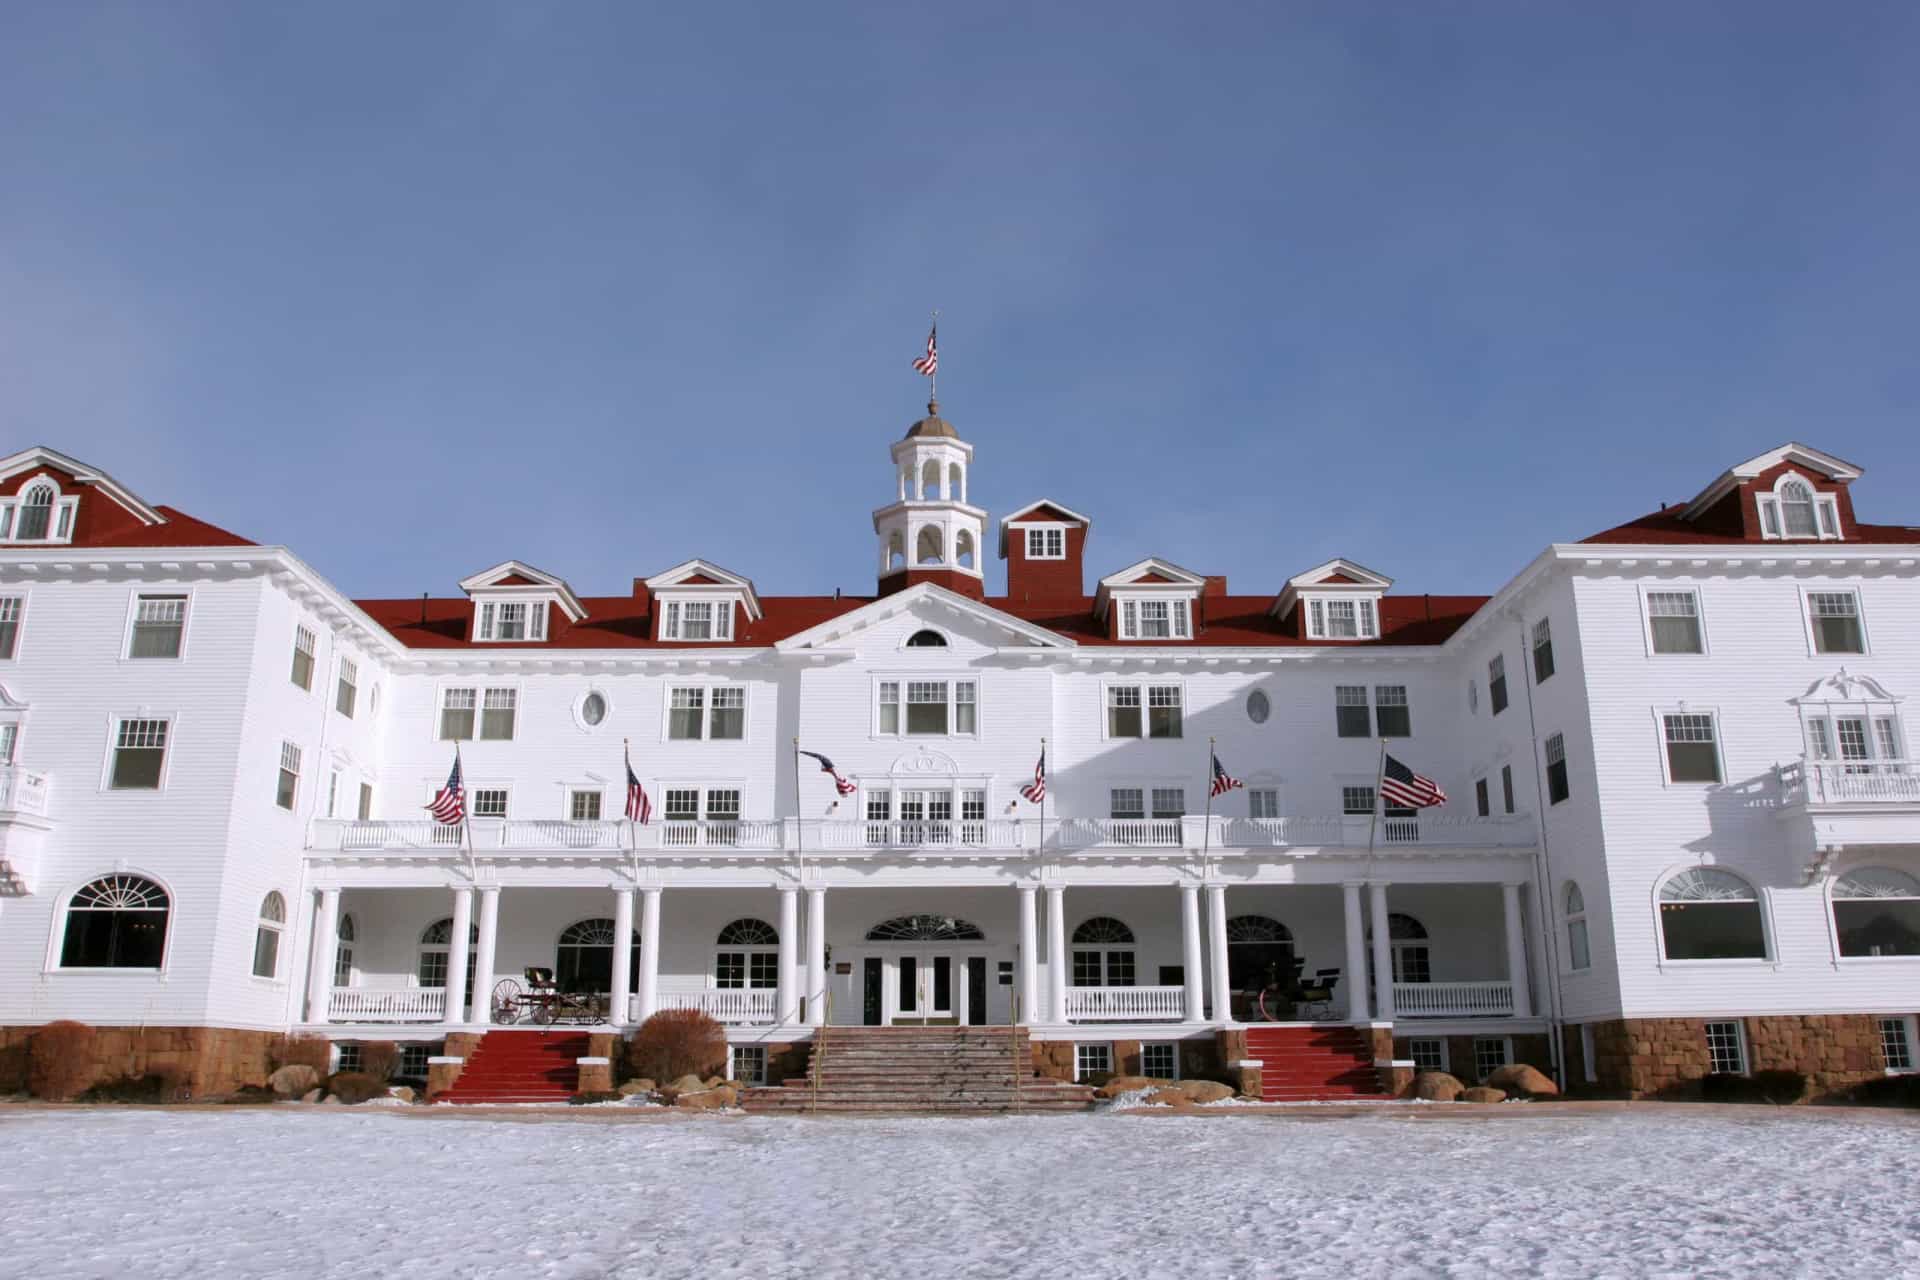 <p>The Stanley Hotel in Estes Park is the number one spot when it comes to haunted places in Colorado. So much so, in fact, that it was the inspiration for Stephen King's 'The Shining.' King actually spent the night in the infamous room 217.</p>